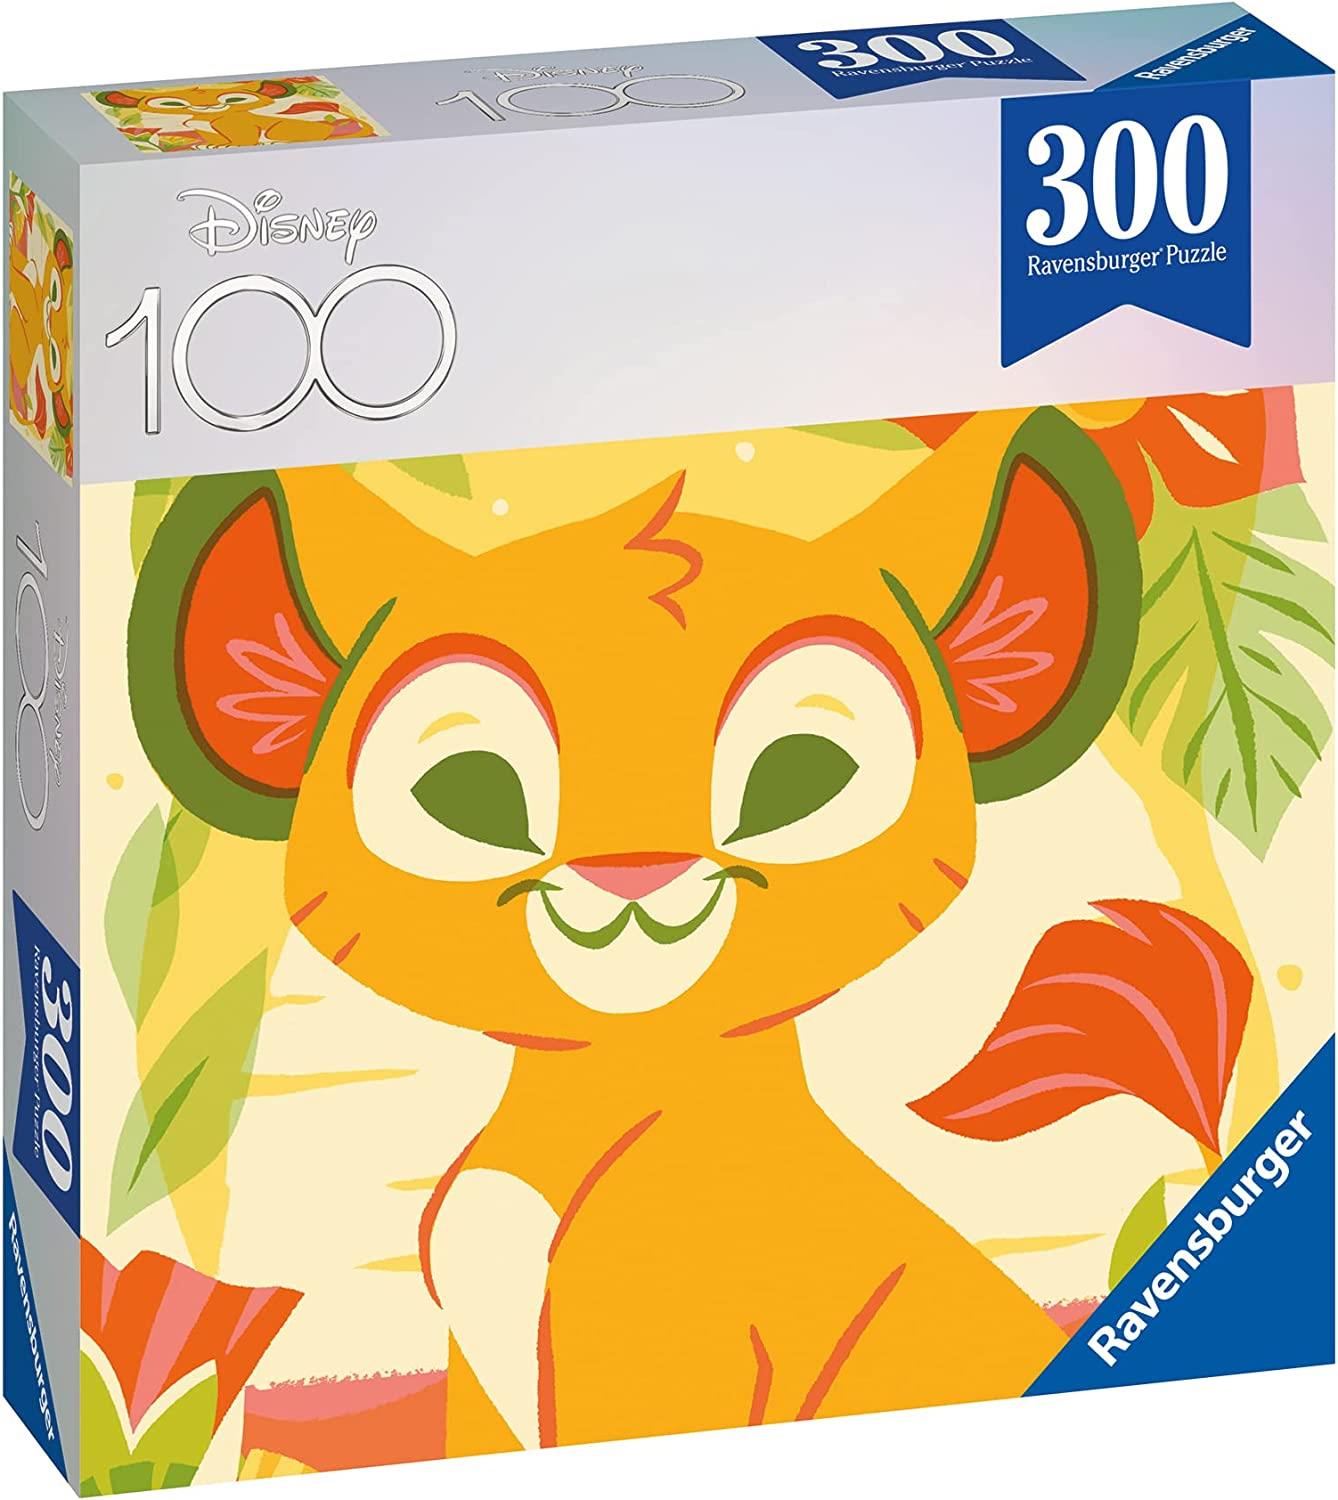 Ravensburger Disney 100th Anniversary The Lion King Simba Jigsaw Puzzle (300 Pieces)